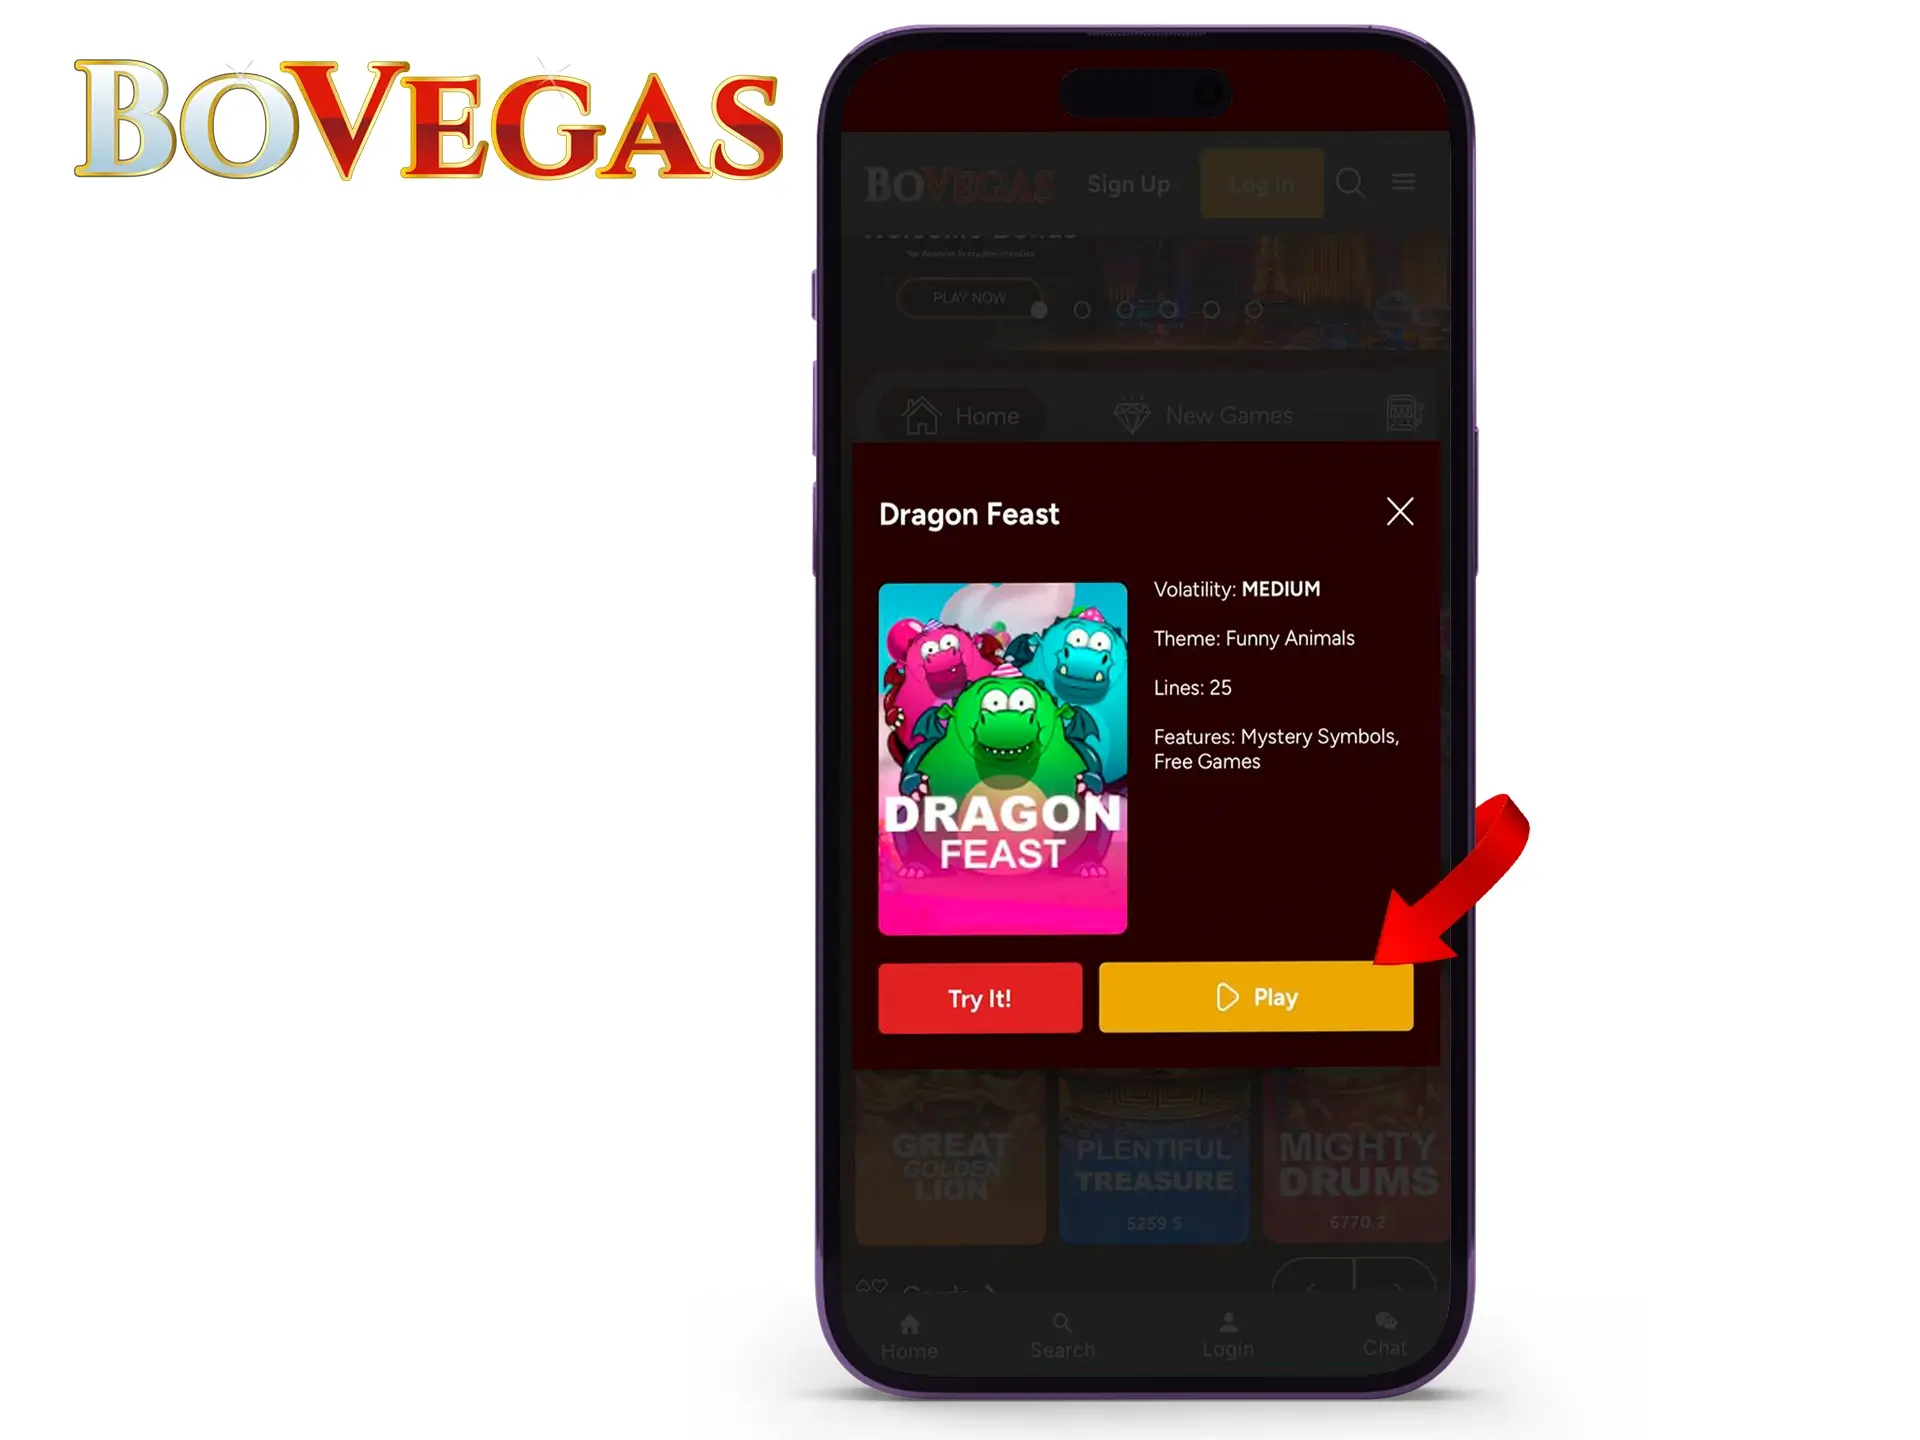 Use BoVegas mobile version to play casino on iOS devices.